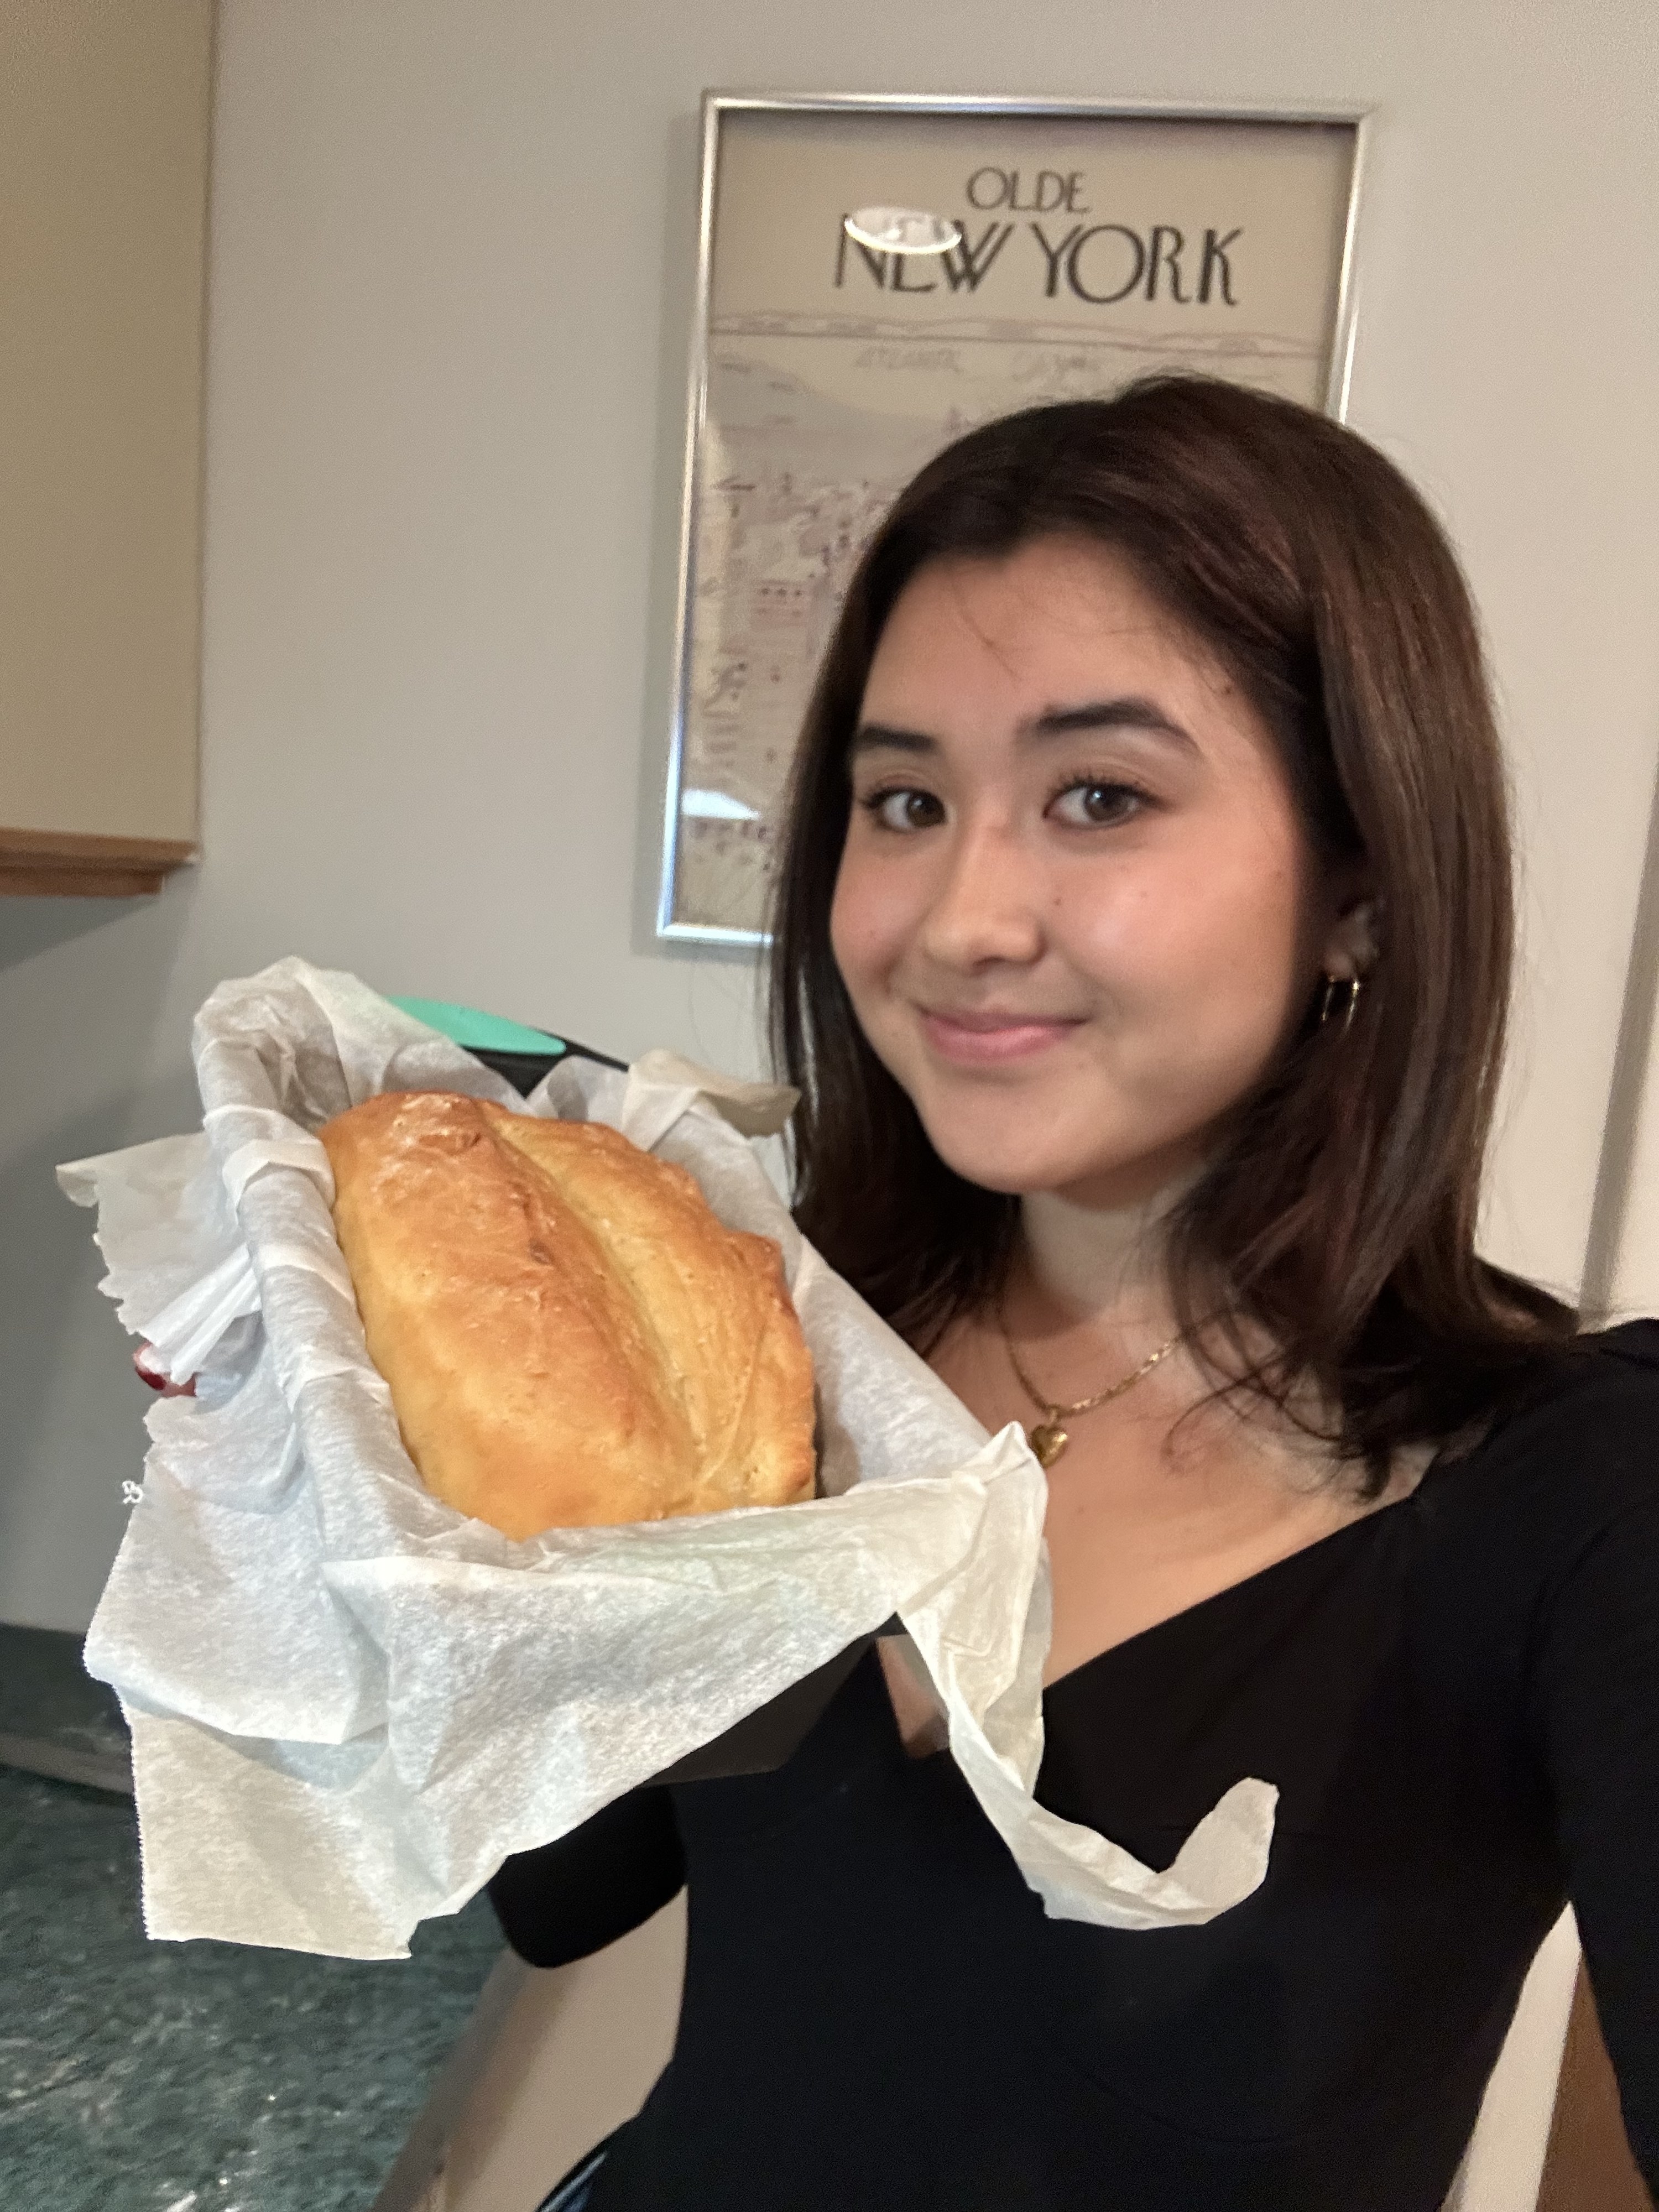 the author with the bread